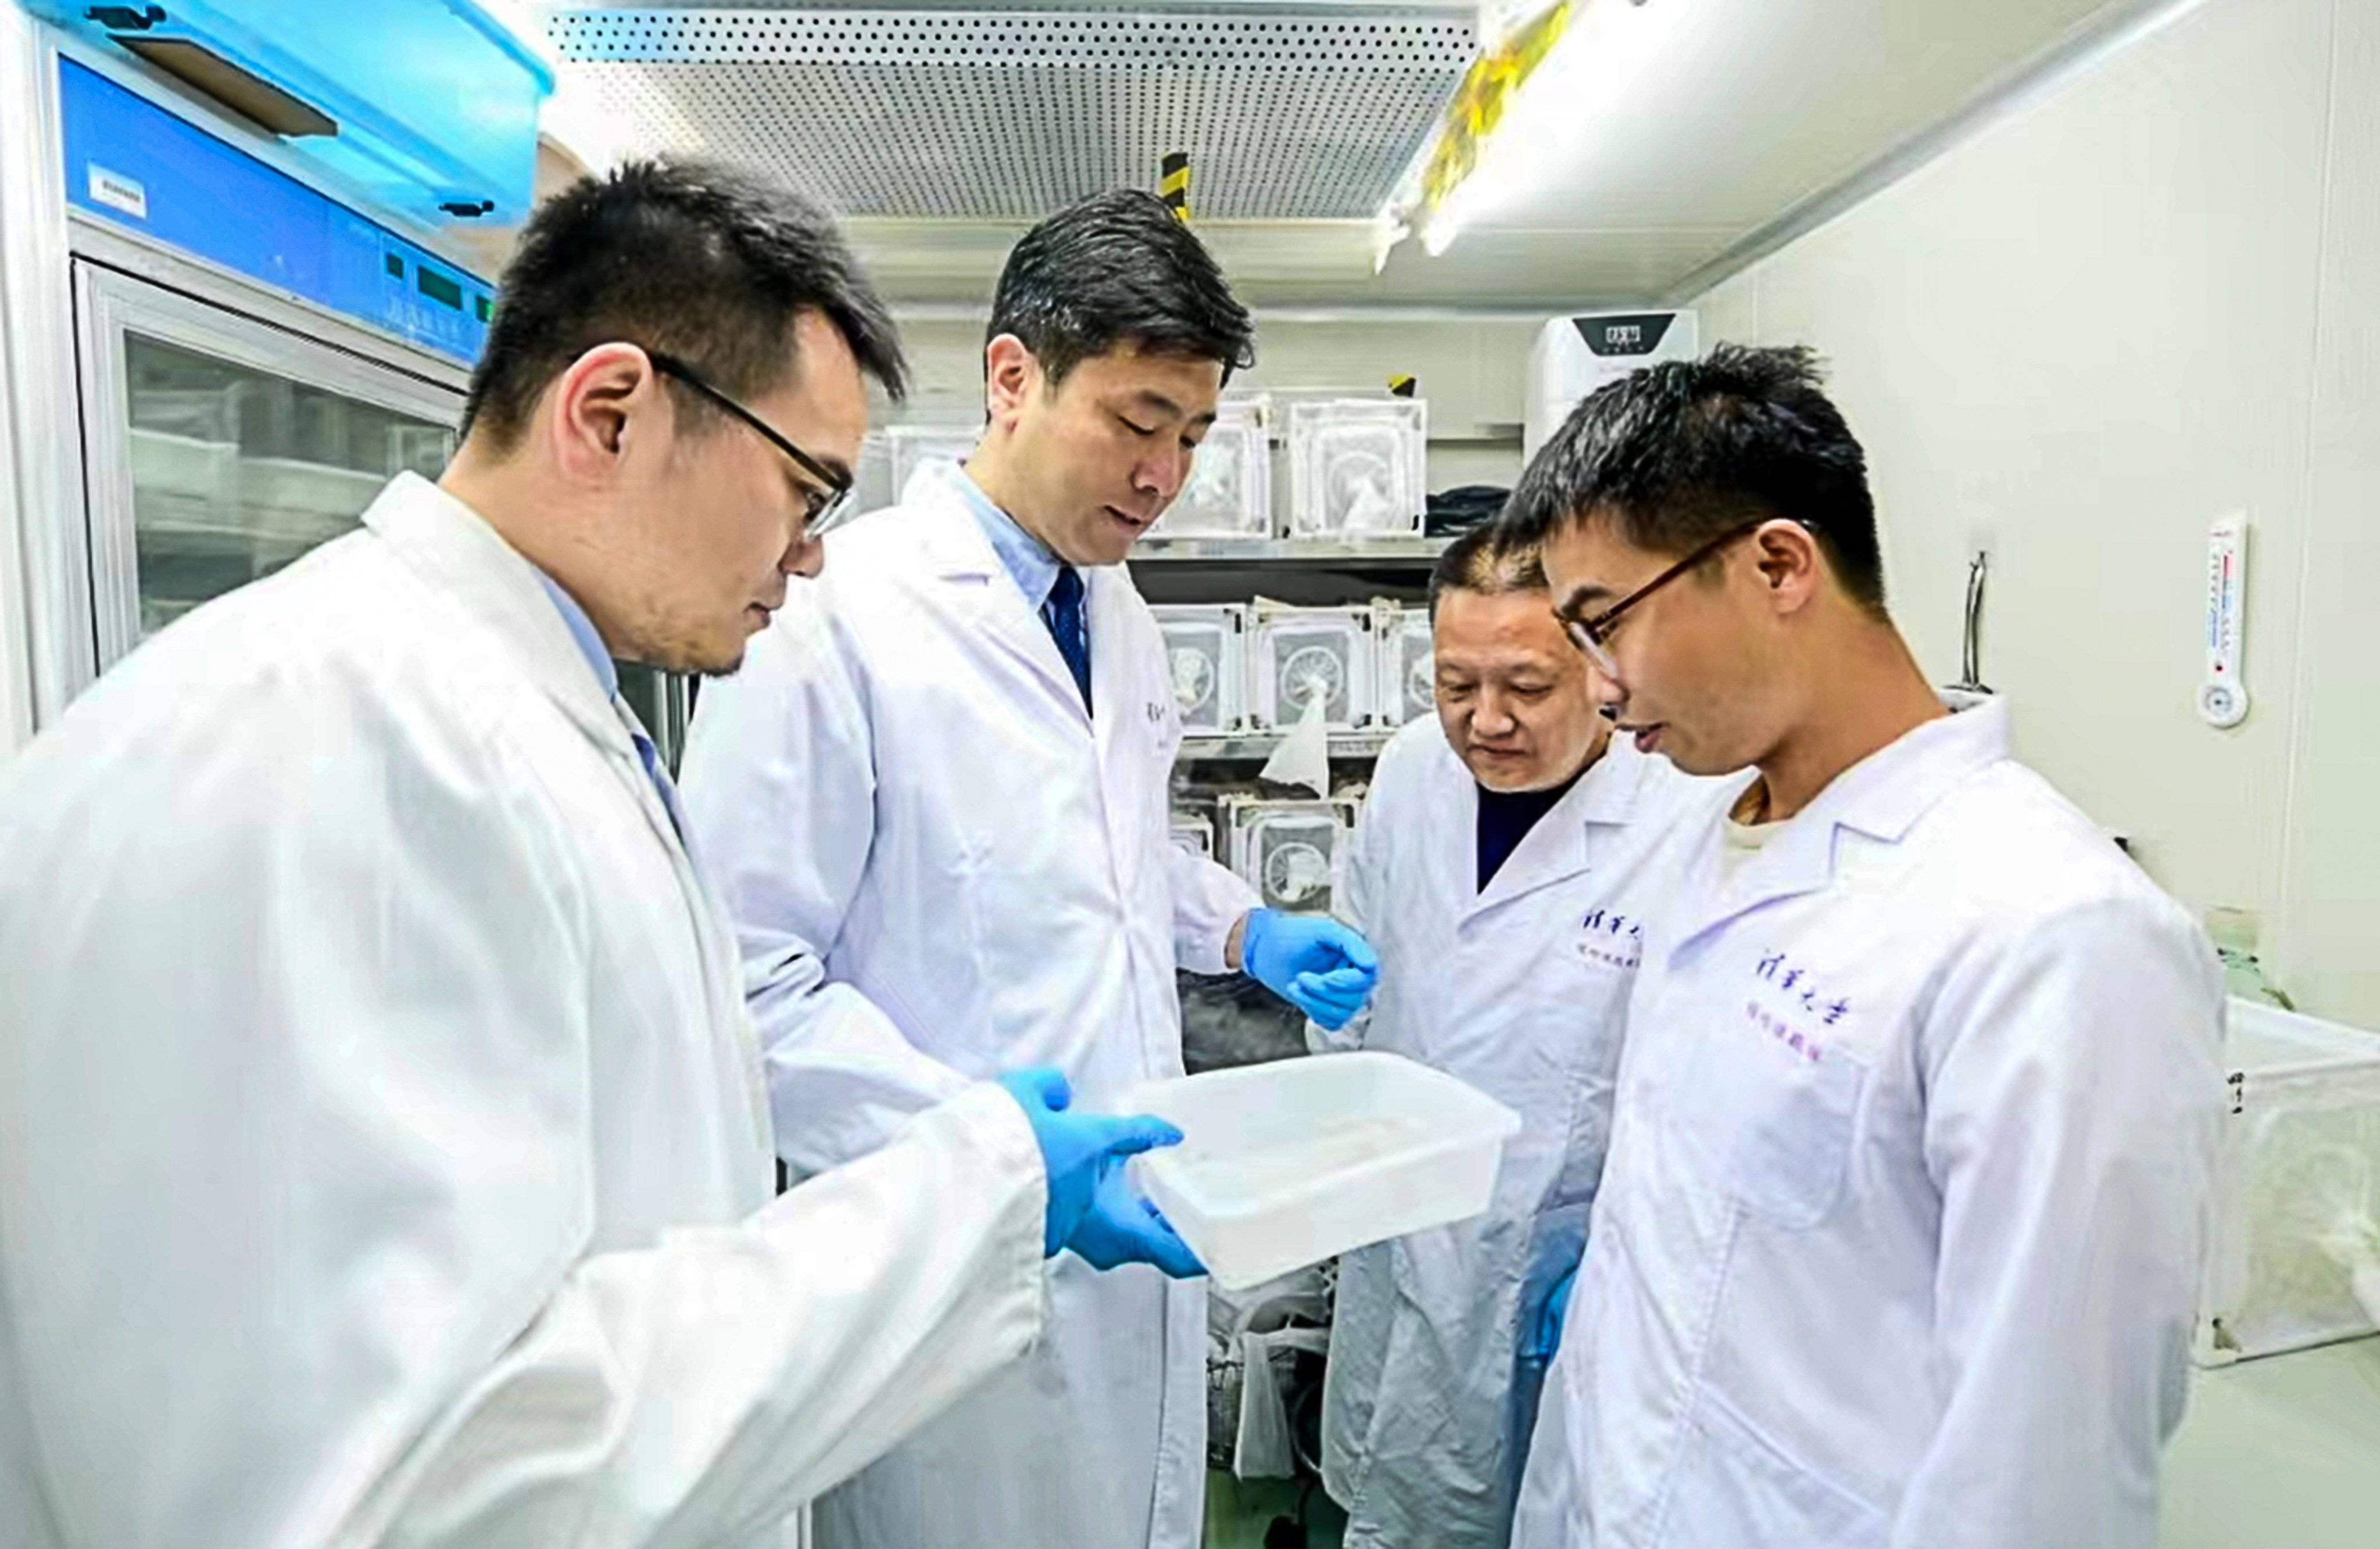 A team of Chinese scientists  led by Cheng Gong, second from left, says it has identified a gut bacteria from mosquitoes that could prevent them from being infected by viruses, including dengue and Zika. Photo: Handout